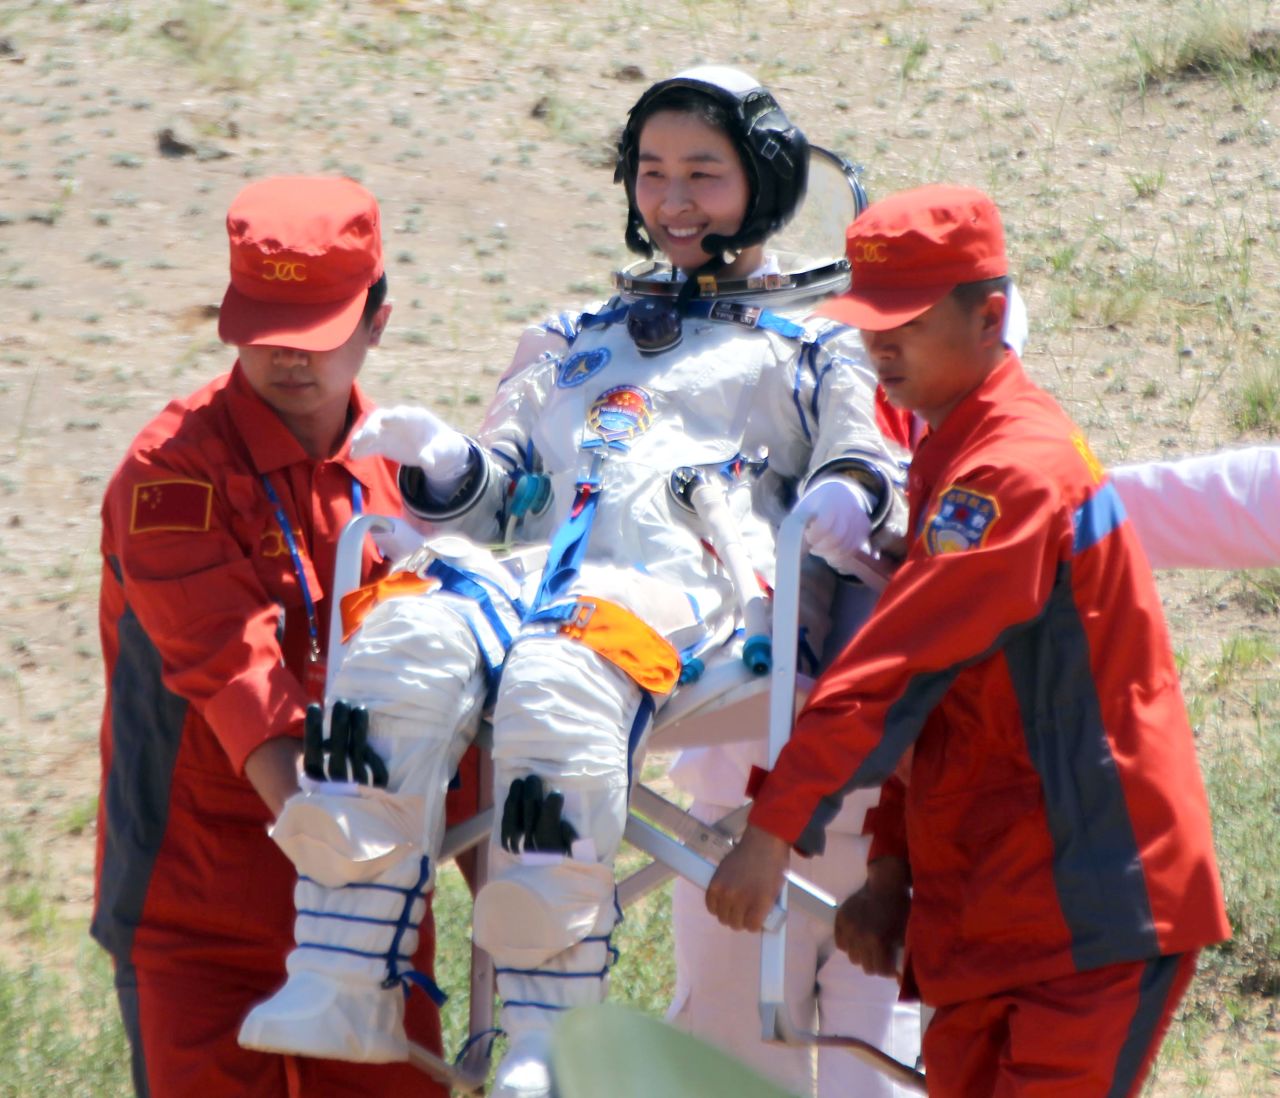 China fired its first woman into orbit in 2012, could a Chinese astronaut set foot on the moon in 2013?